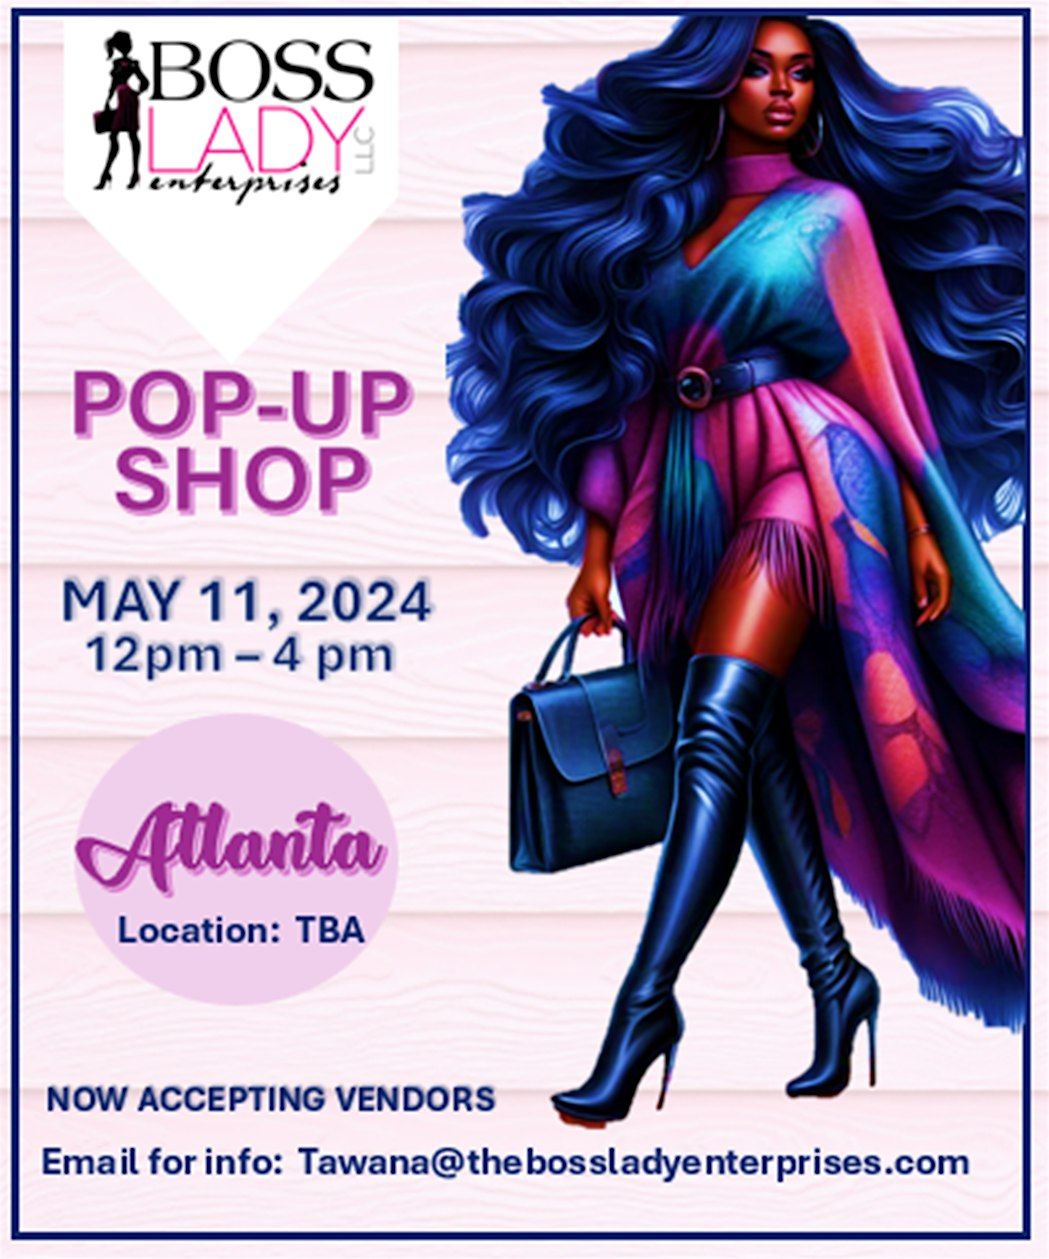 Mother's Day Weekend Pop-Up Shop Experience